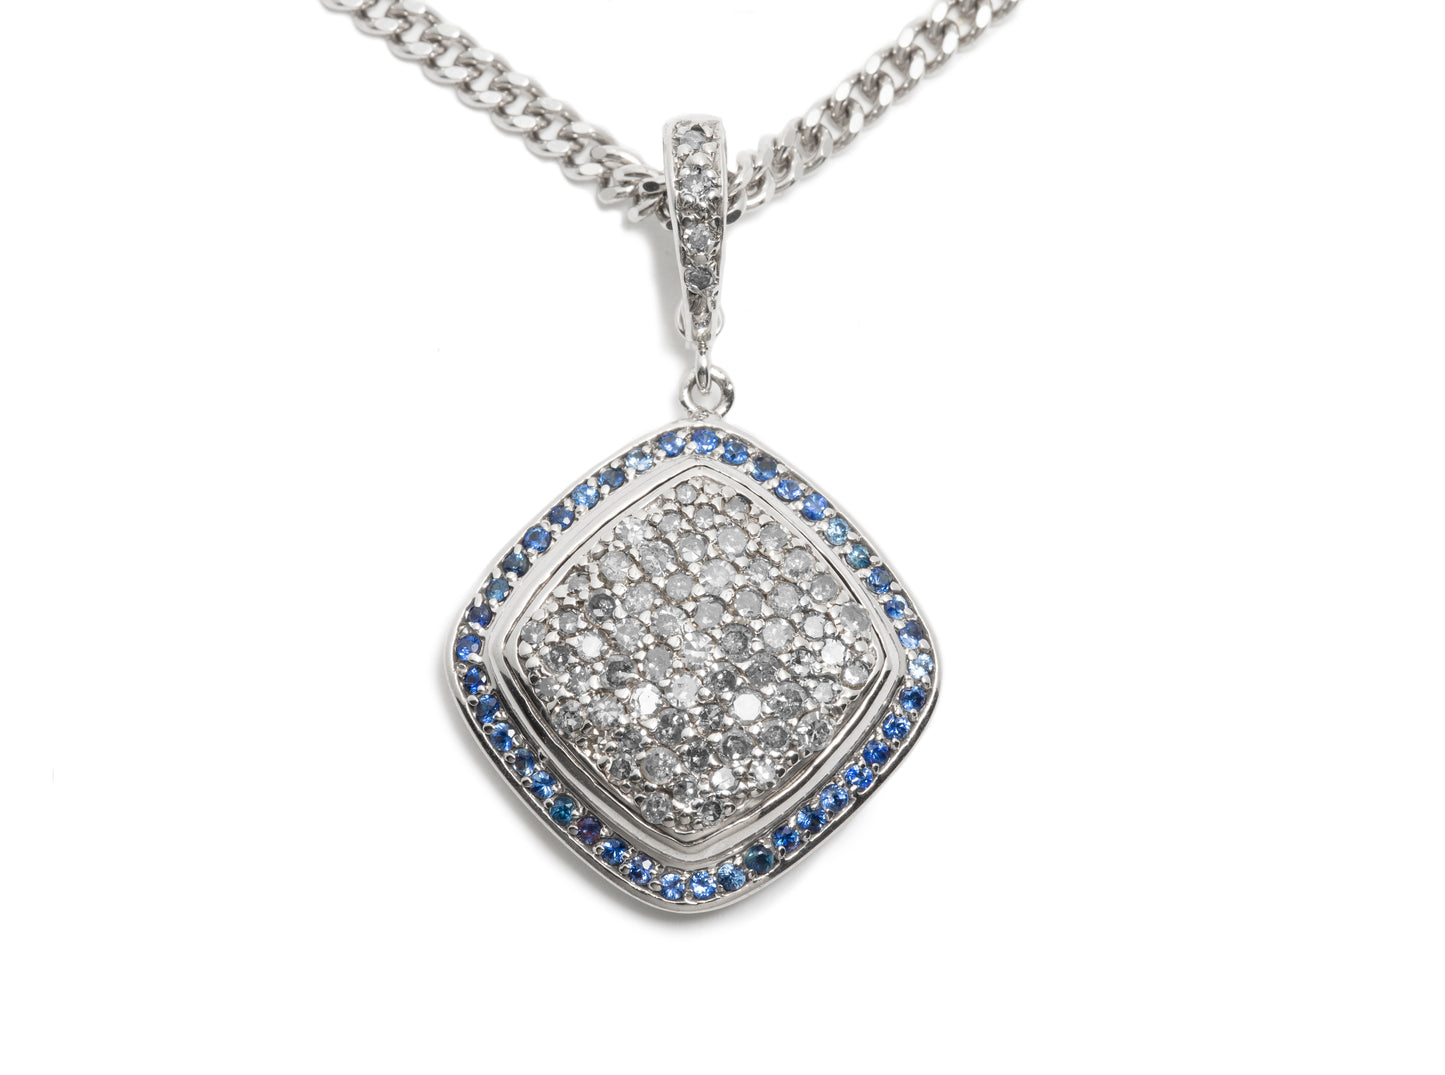 Royal Radiance: Blue Sapphire & Brown Diamond Earrings & Pendant Necklace Set in Sterling Silver